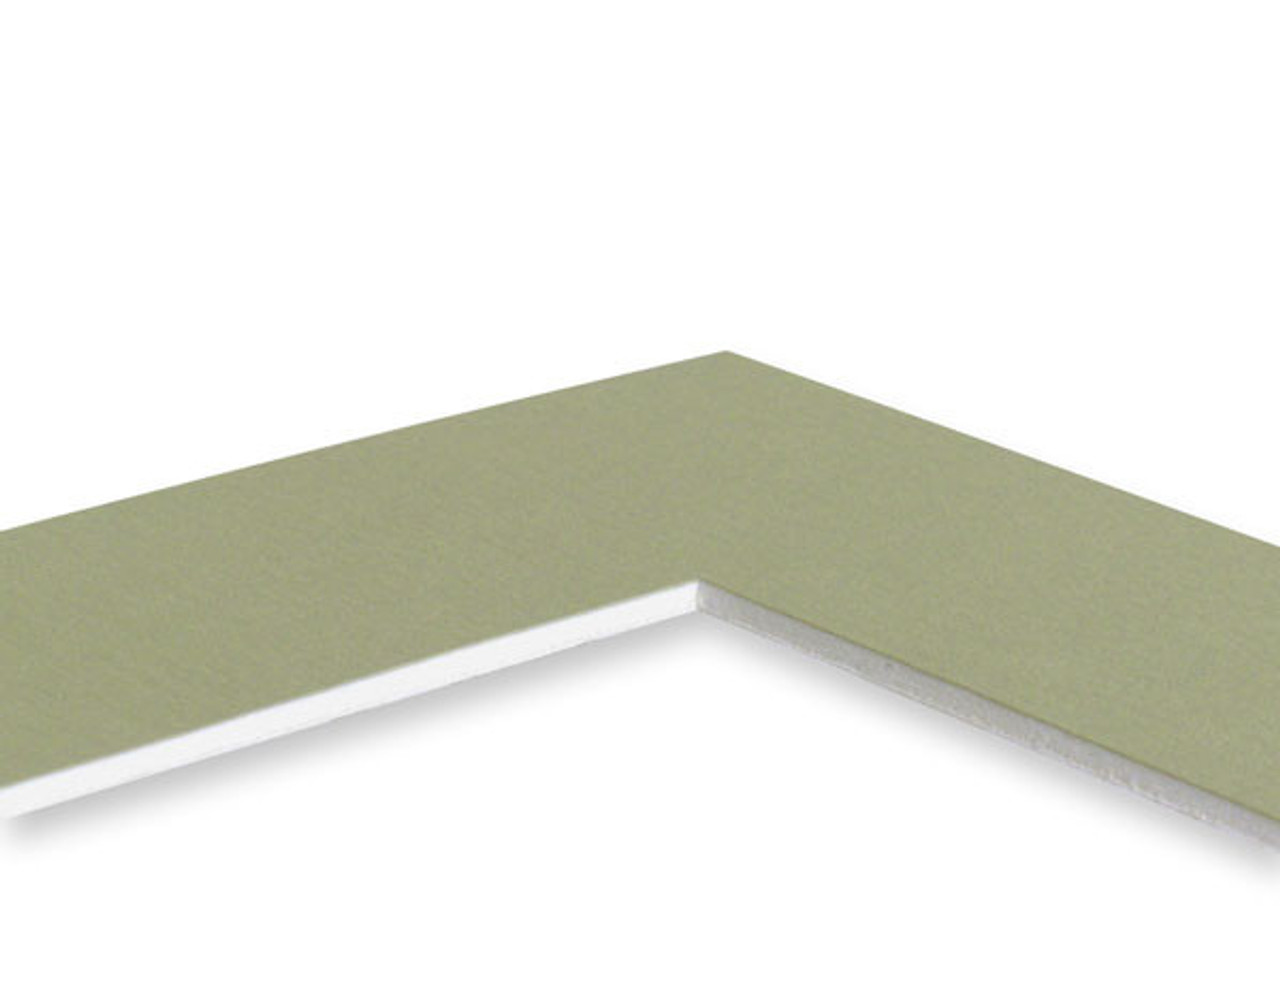 16x20 Single 25 Pack (Standard White Core) - includes mats, backing and sleeves!